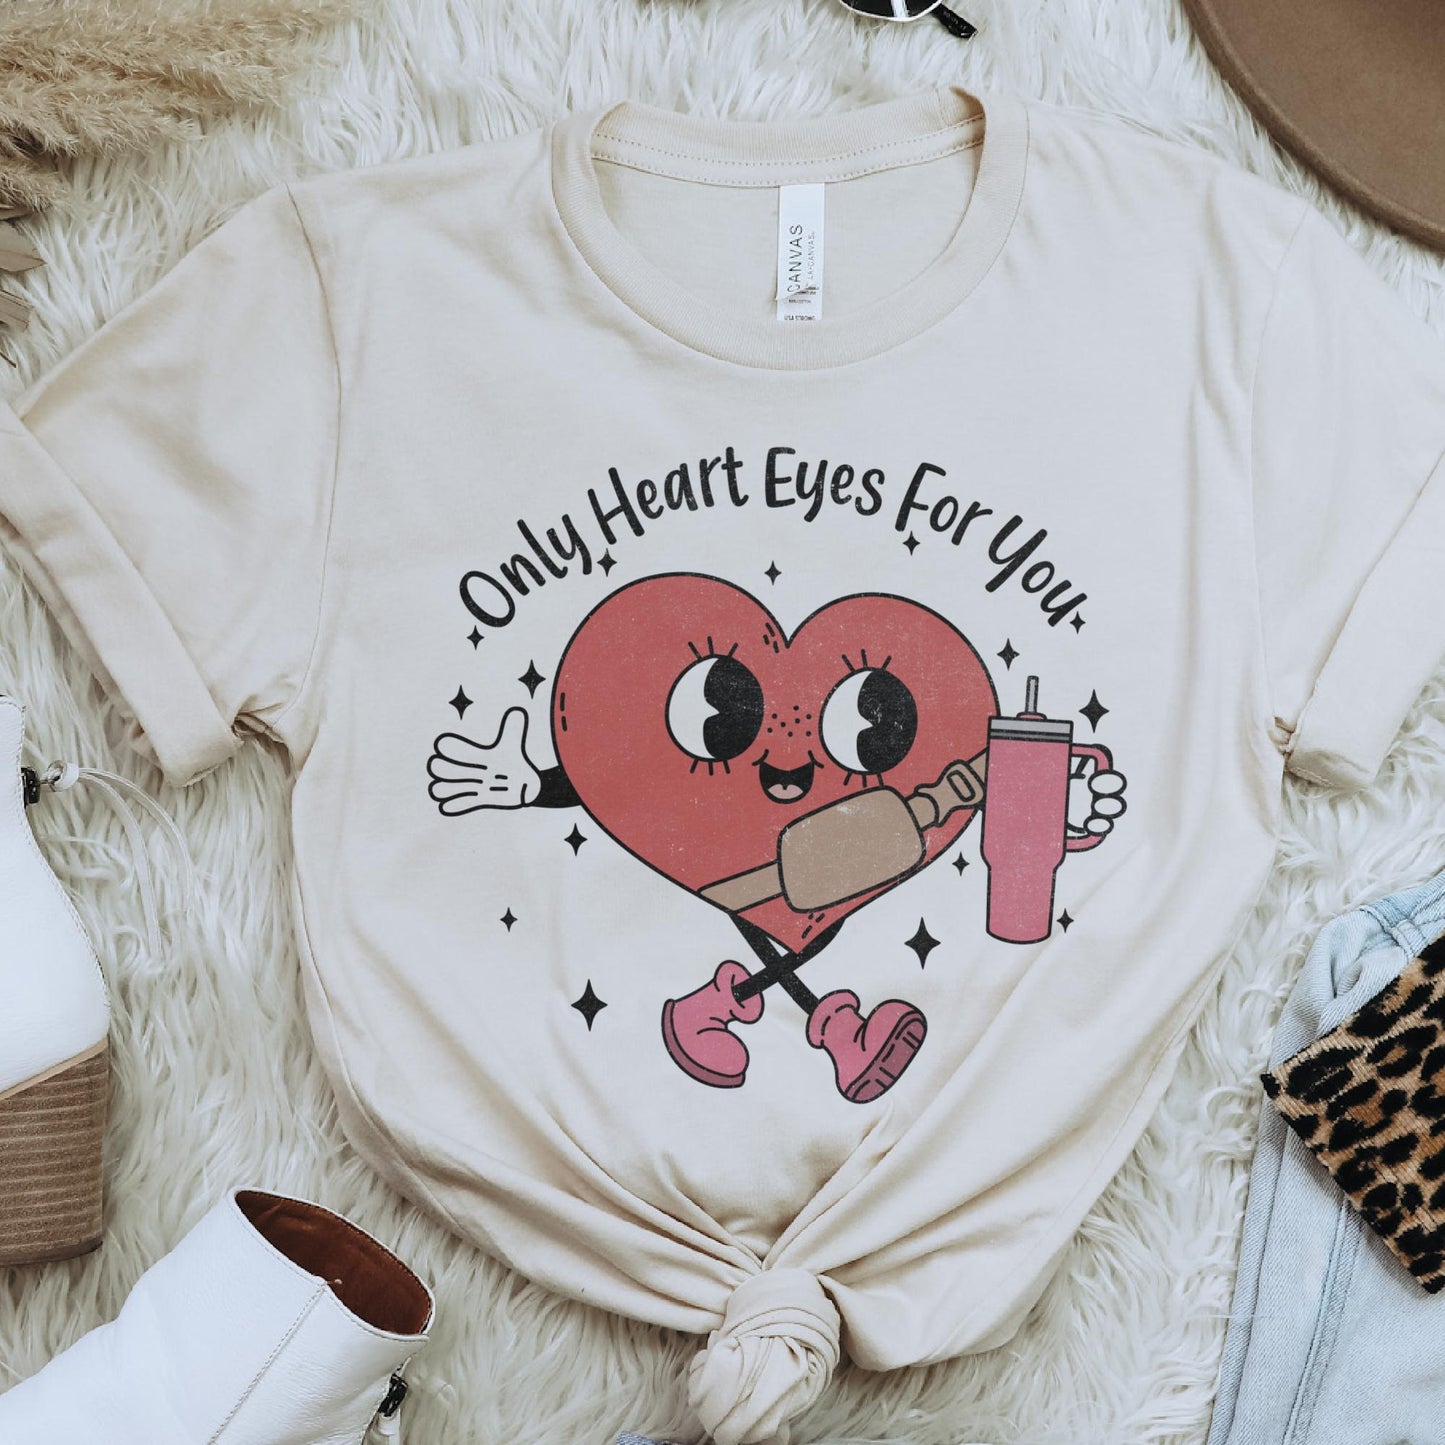 Only Heart Eyes For You Tshirt Small - 3X Valentines Heart T-Shirts Love Sublimation Tee Womans Heart TShirt